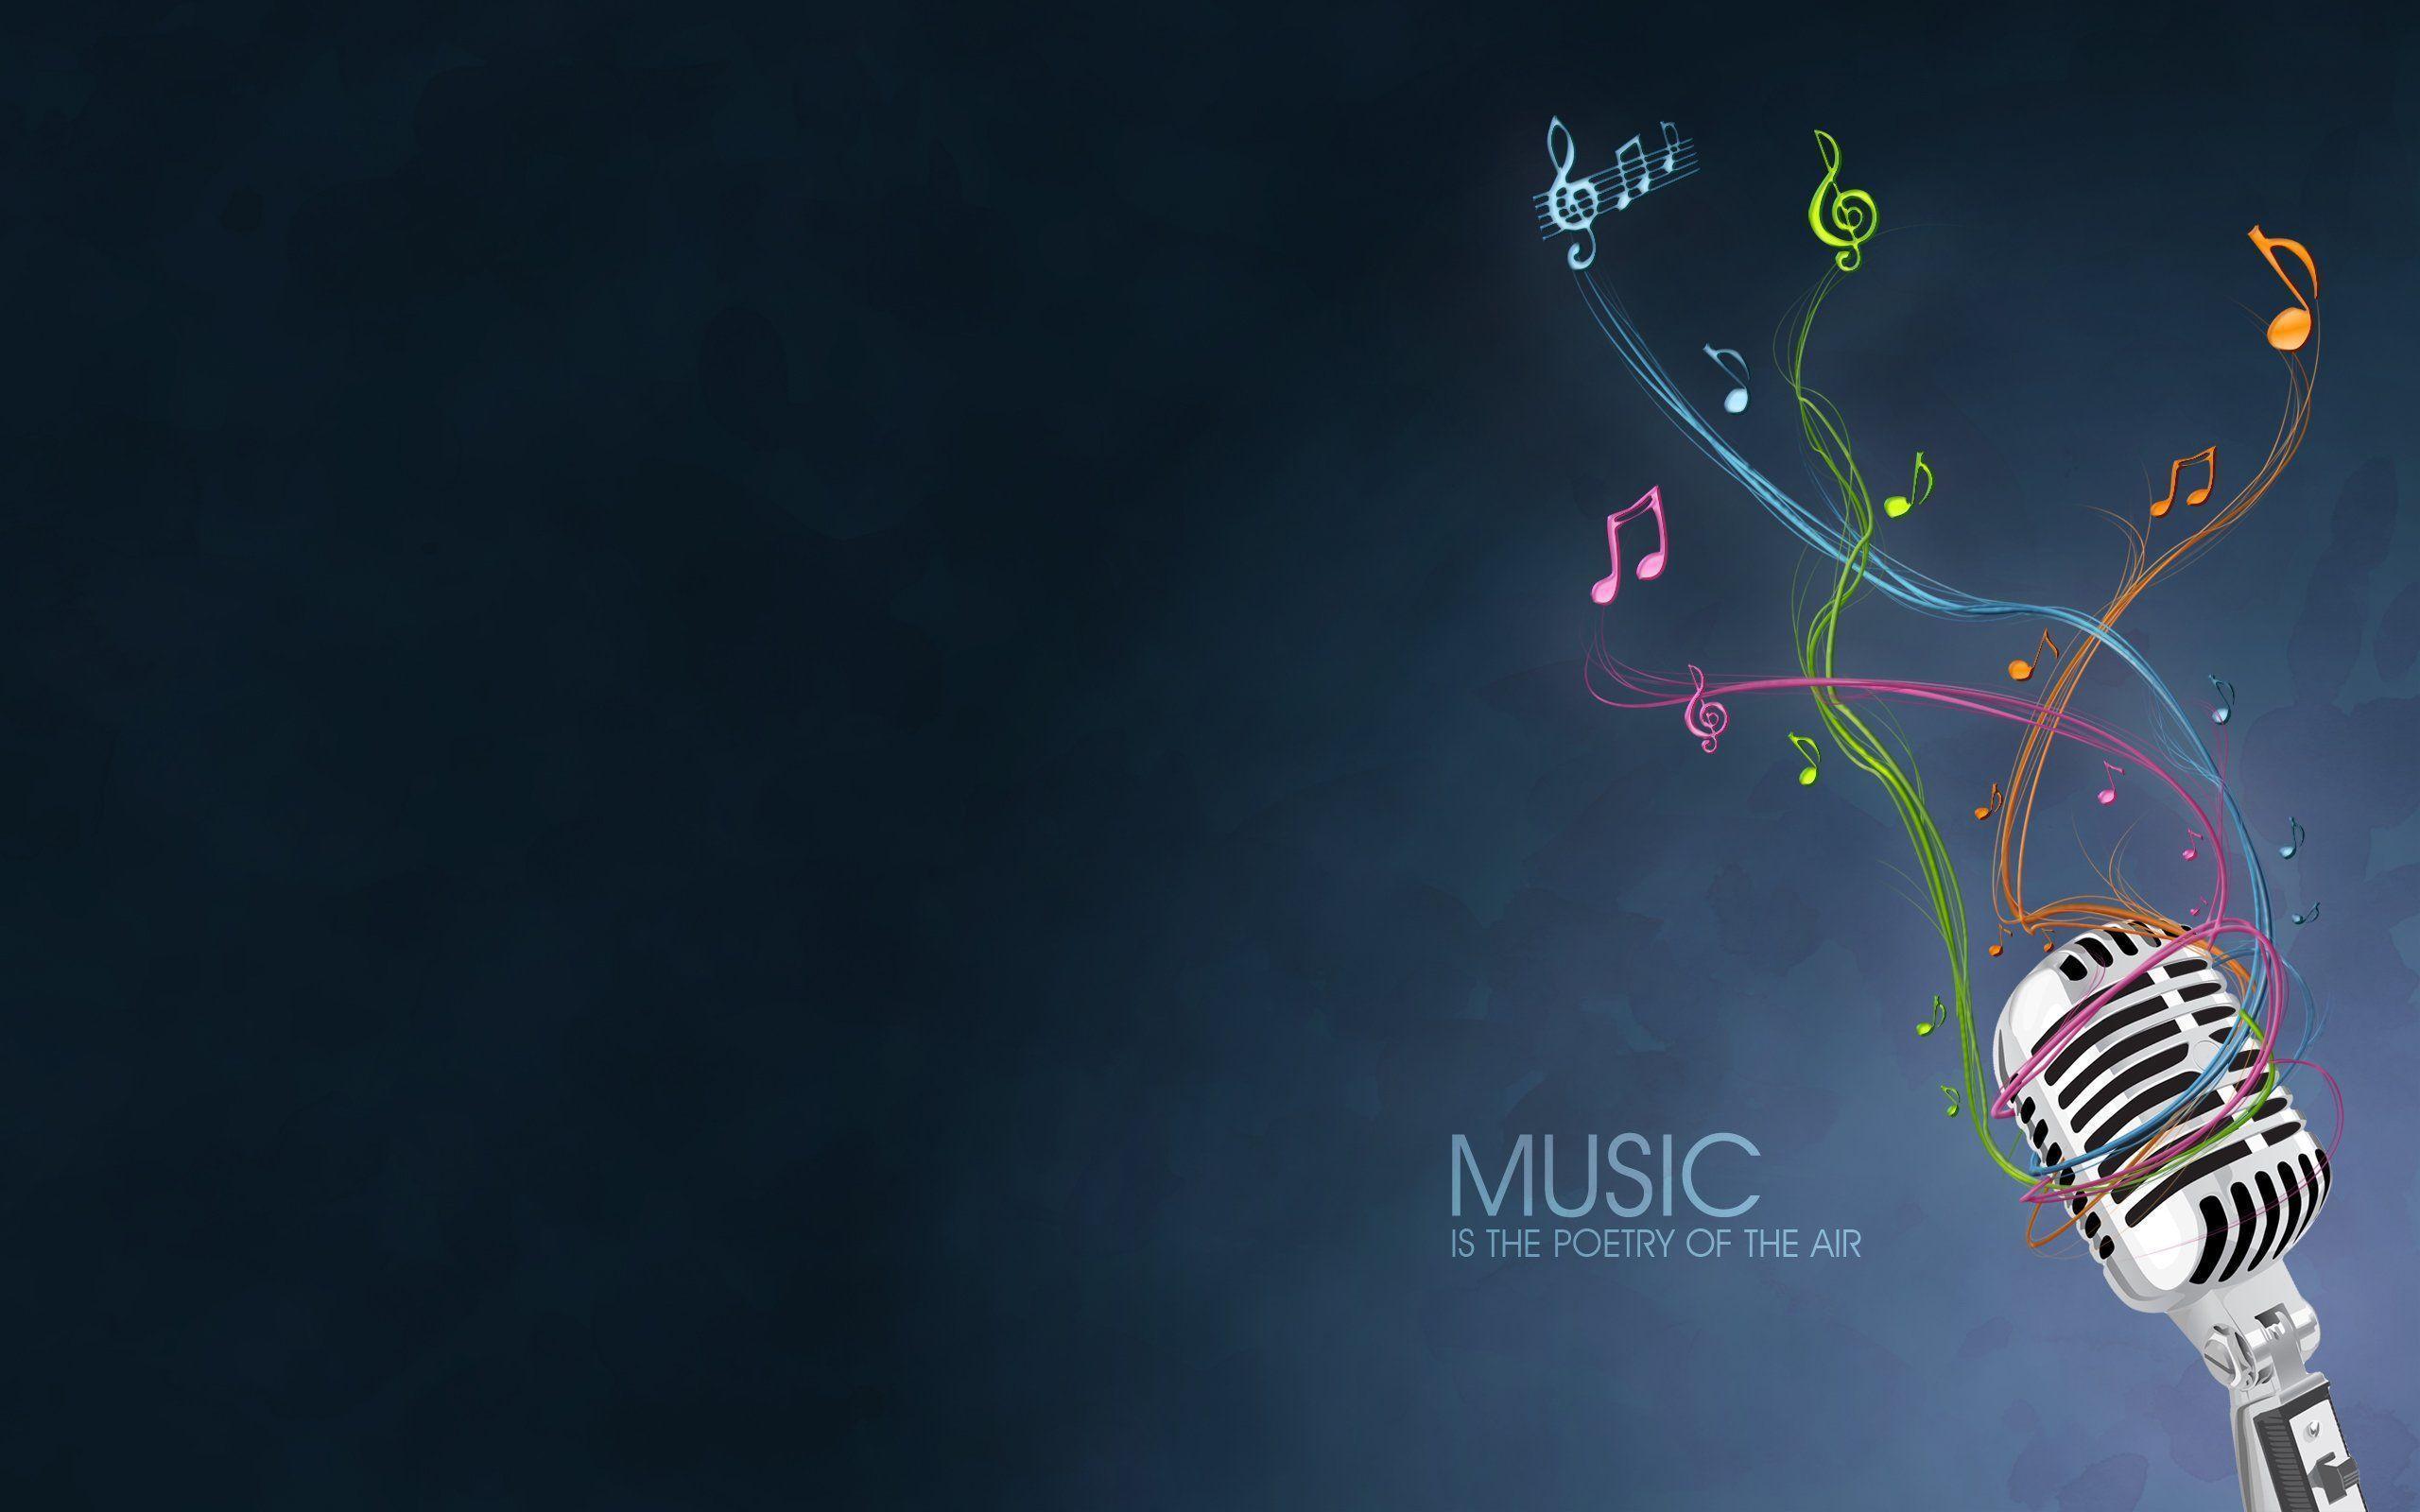 Free Music Wallpaper HD for PC: Be Musical!. Artworks